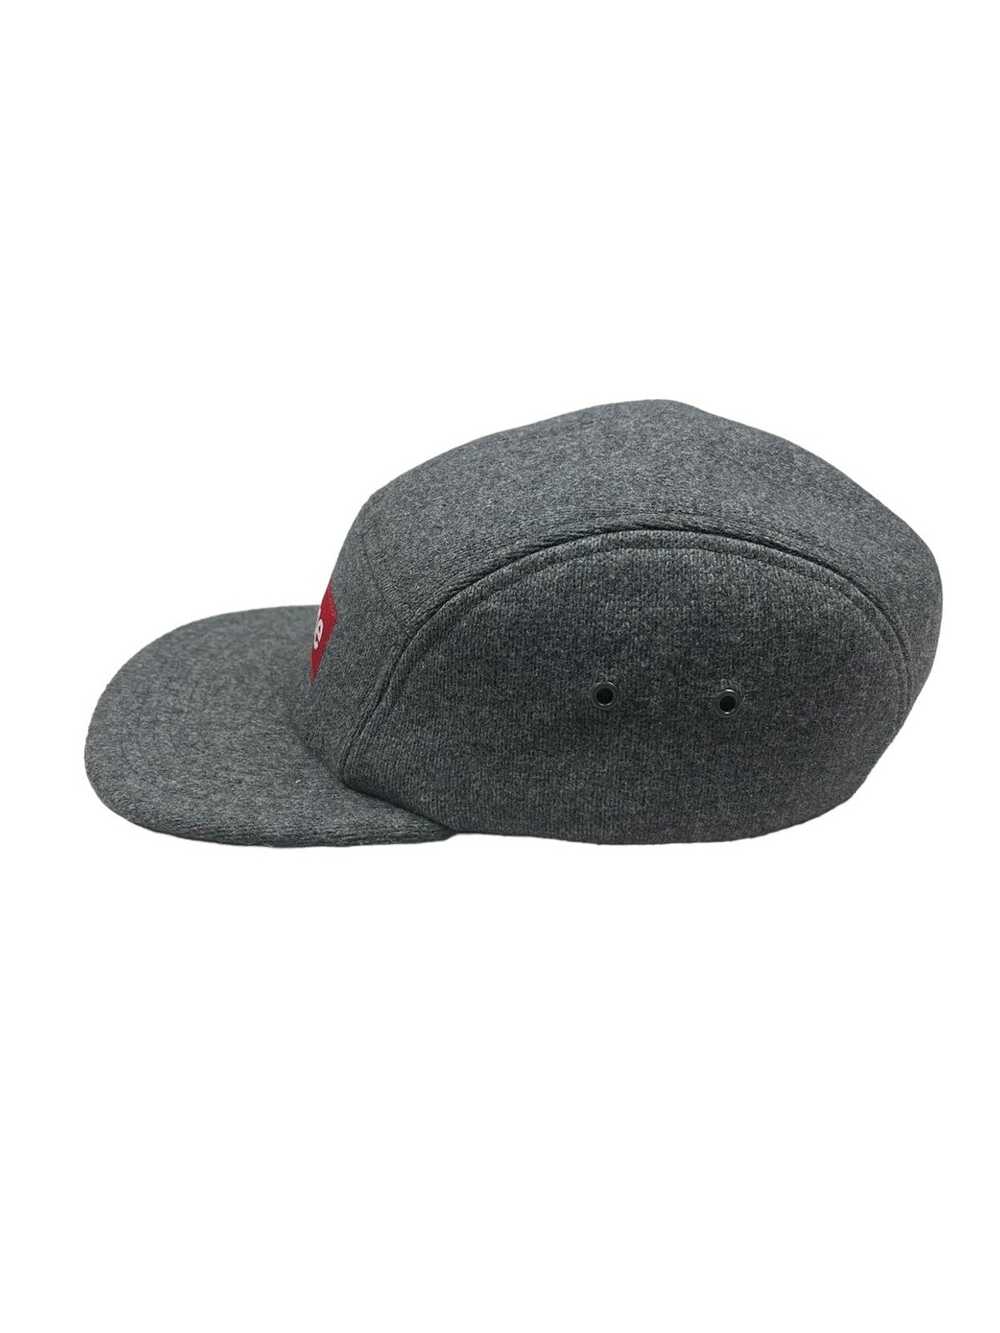 Supreme Supreme Wool Fitted Camp Cap - image 5